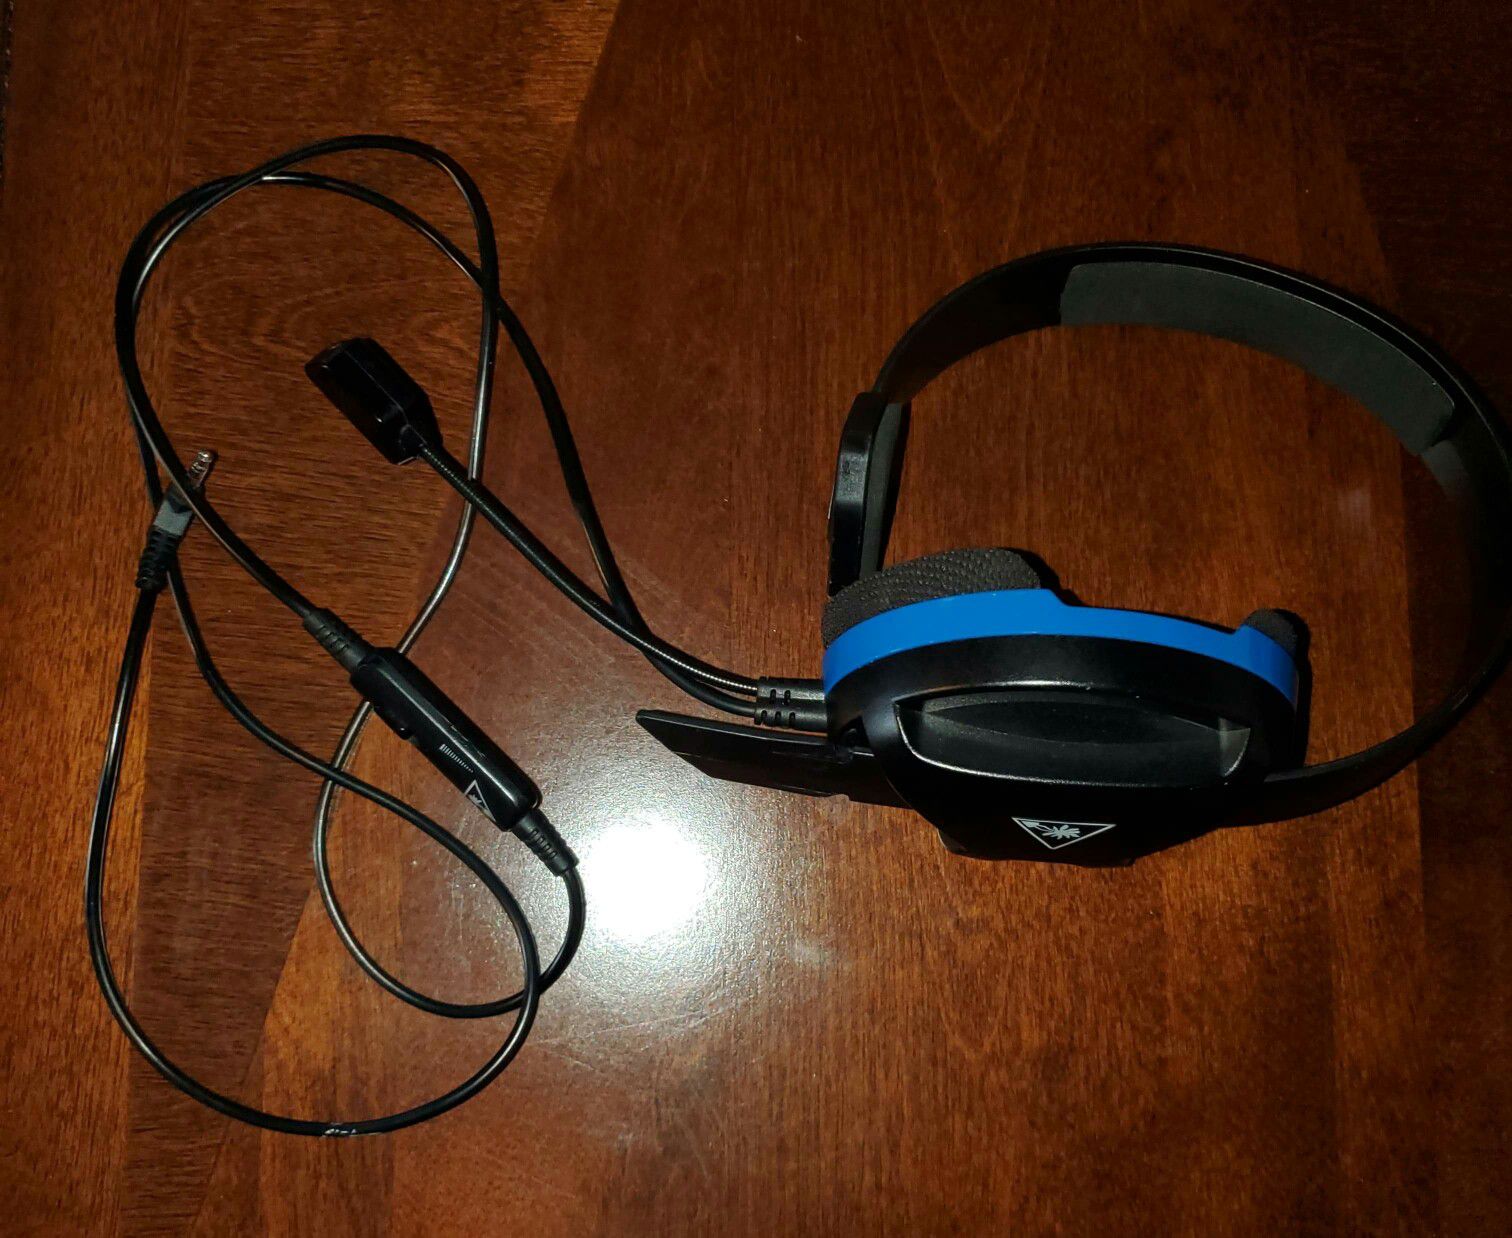 Gaming Headset for PS4